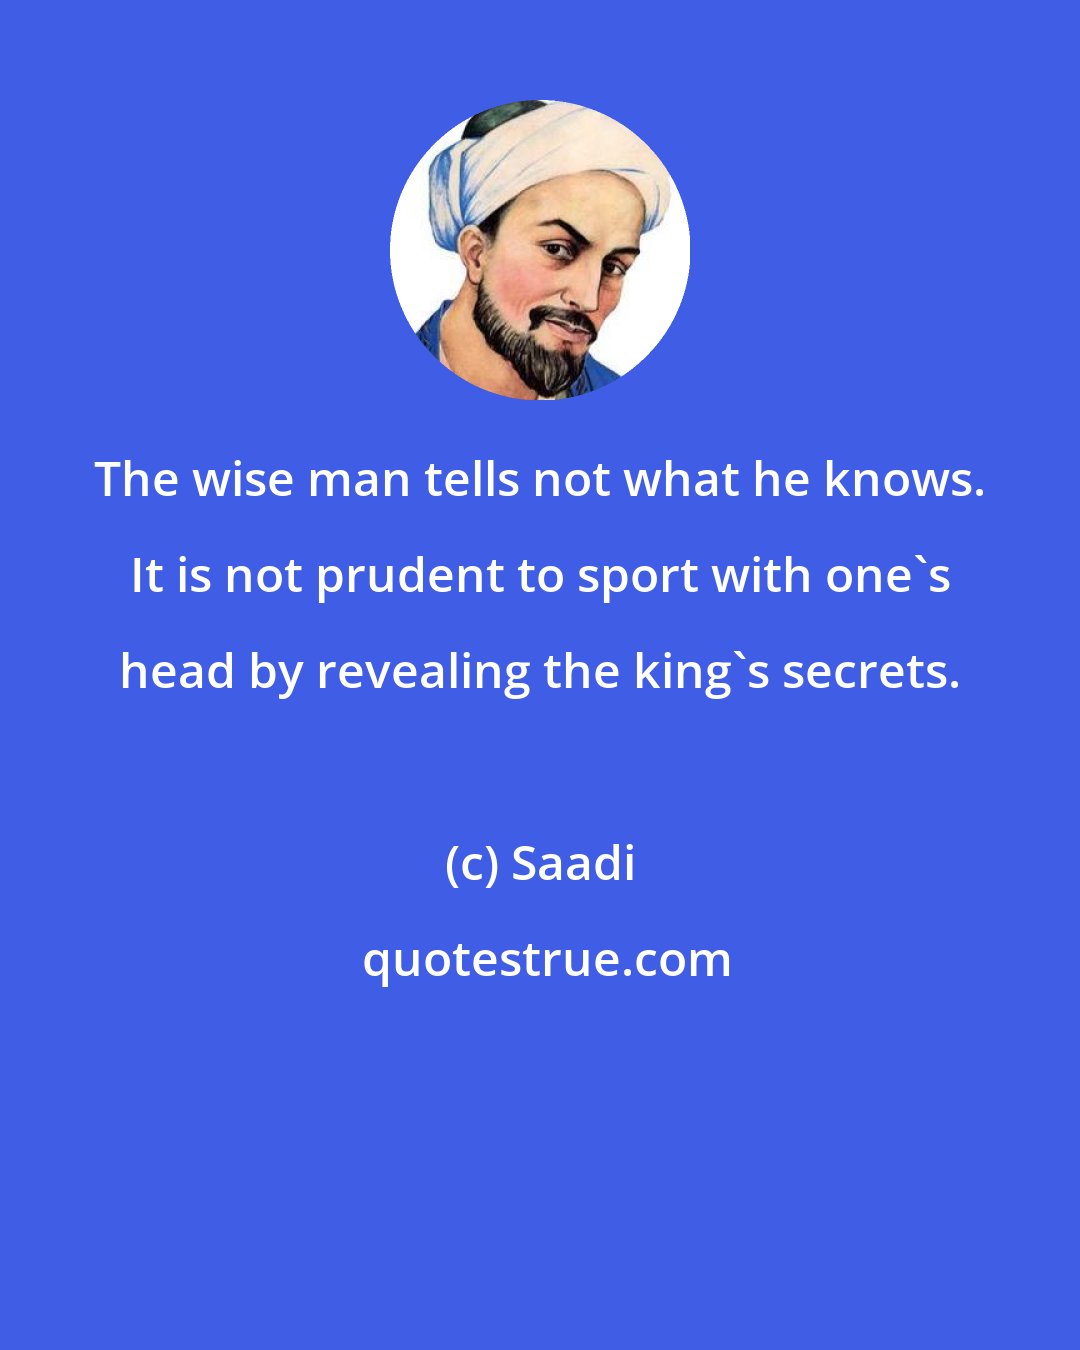 Saadi: The wise man tells not what he knows. It is not prudent to sport with one's head by revealing the king's secrets.